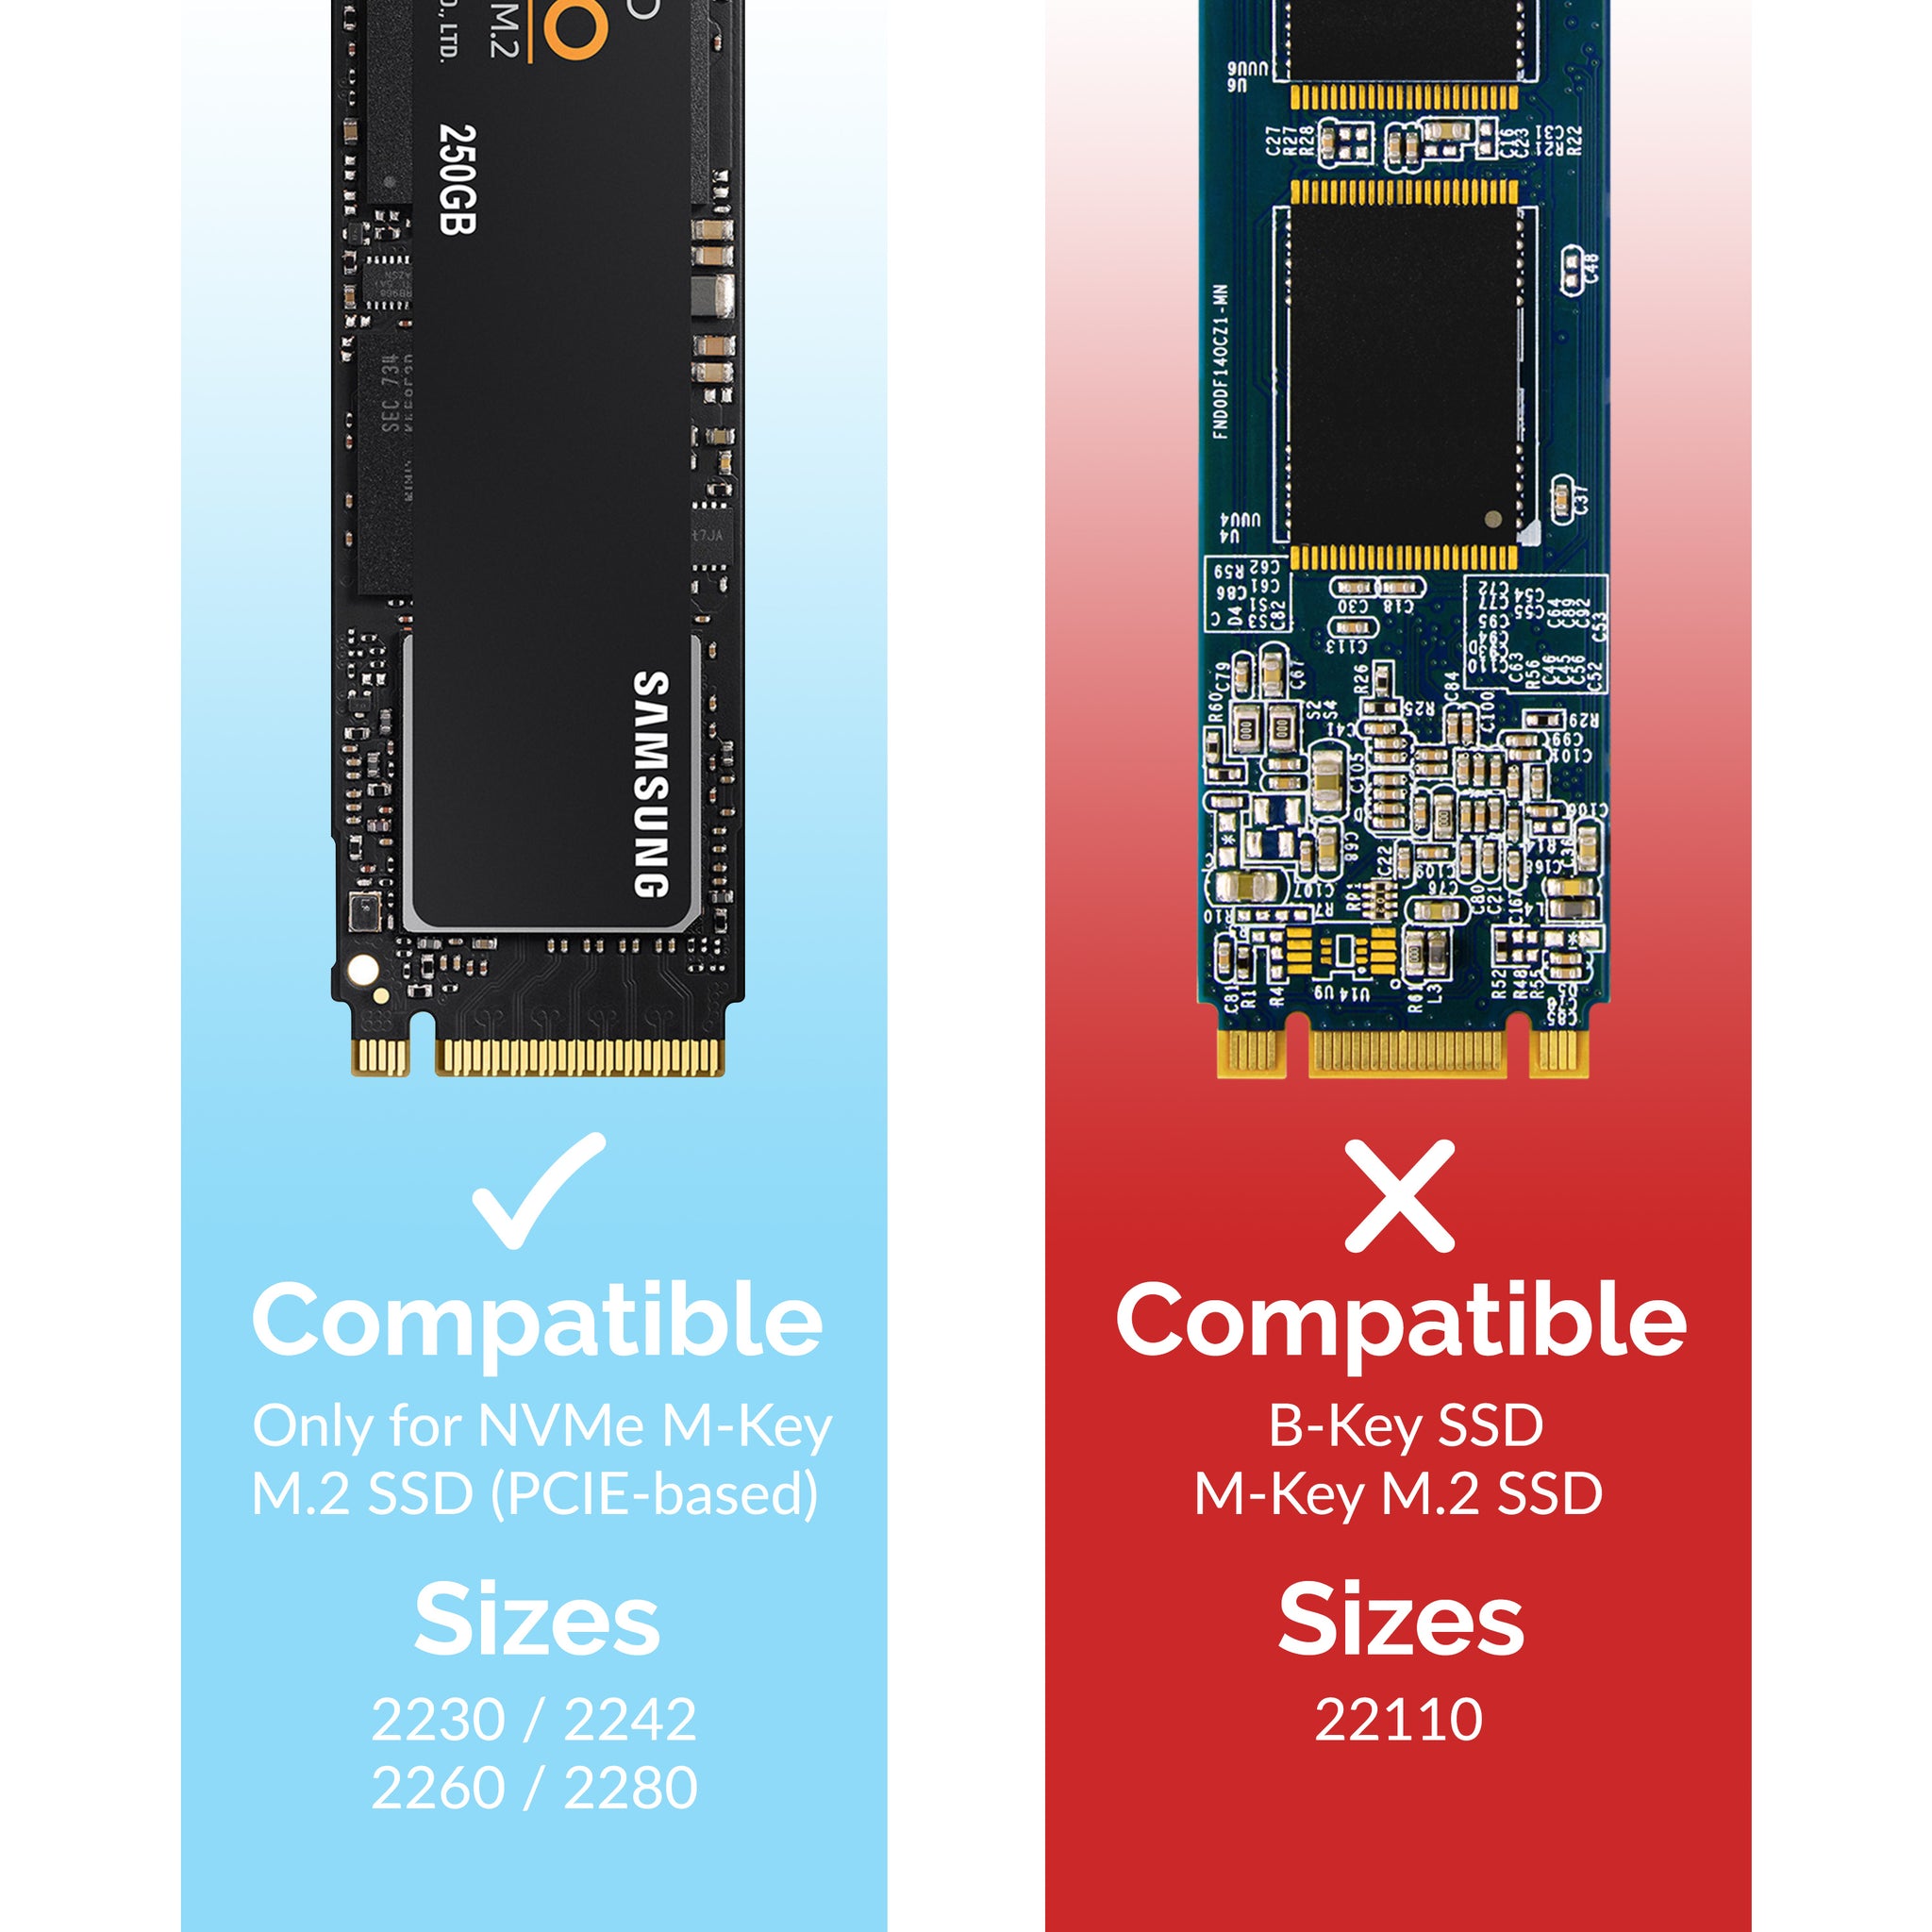 Big obstacles for Sabrent's 16TB M.2 NVMe SSDs, by NetDefend